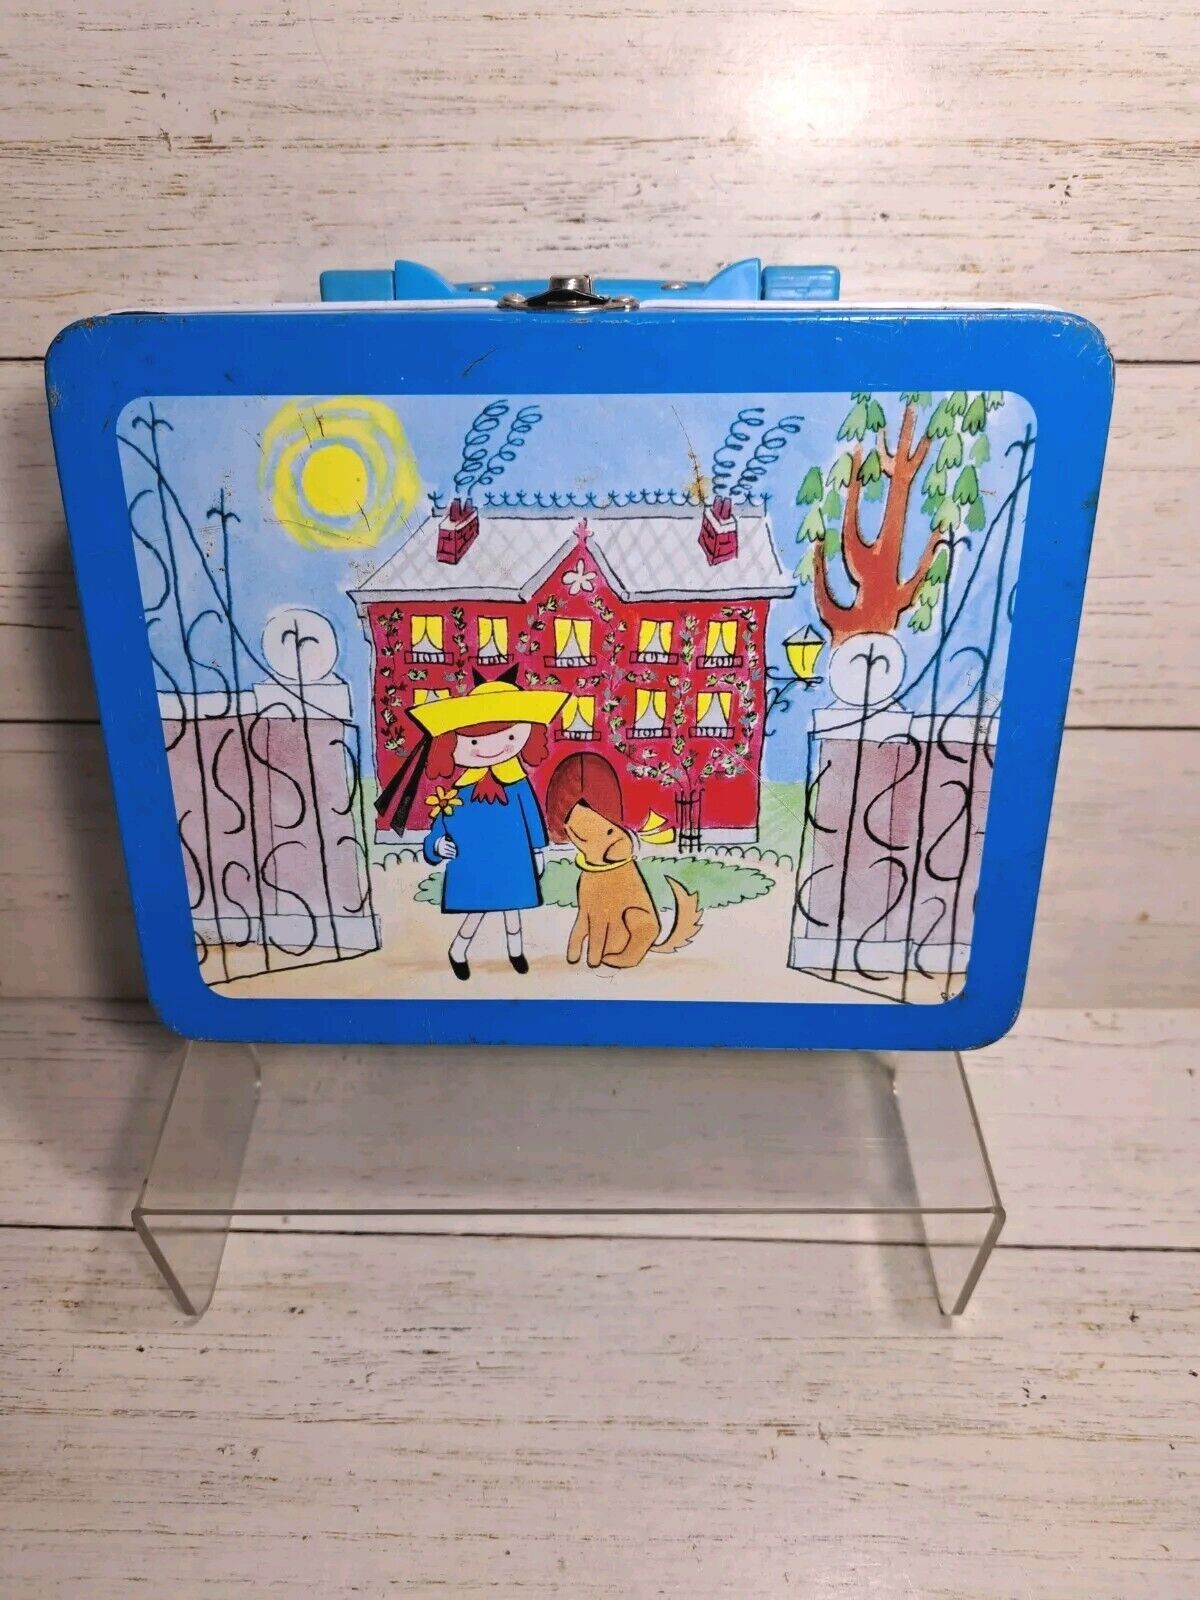 Madeline Metal Lunch Box 1997 Vintage Kids Children's Book Character Dog House